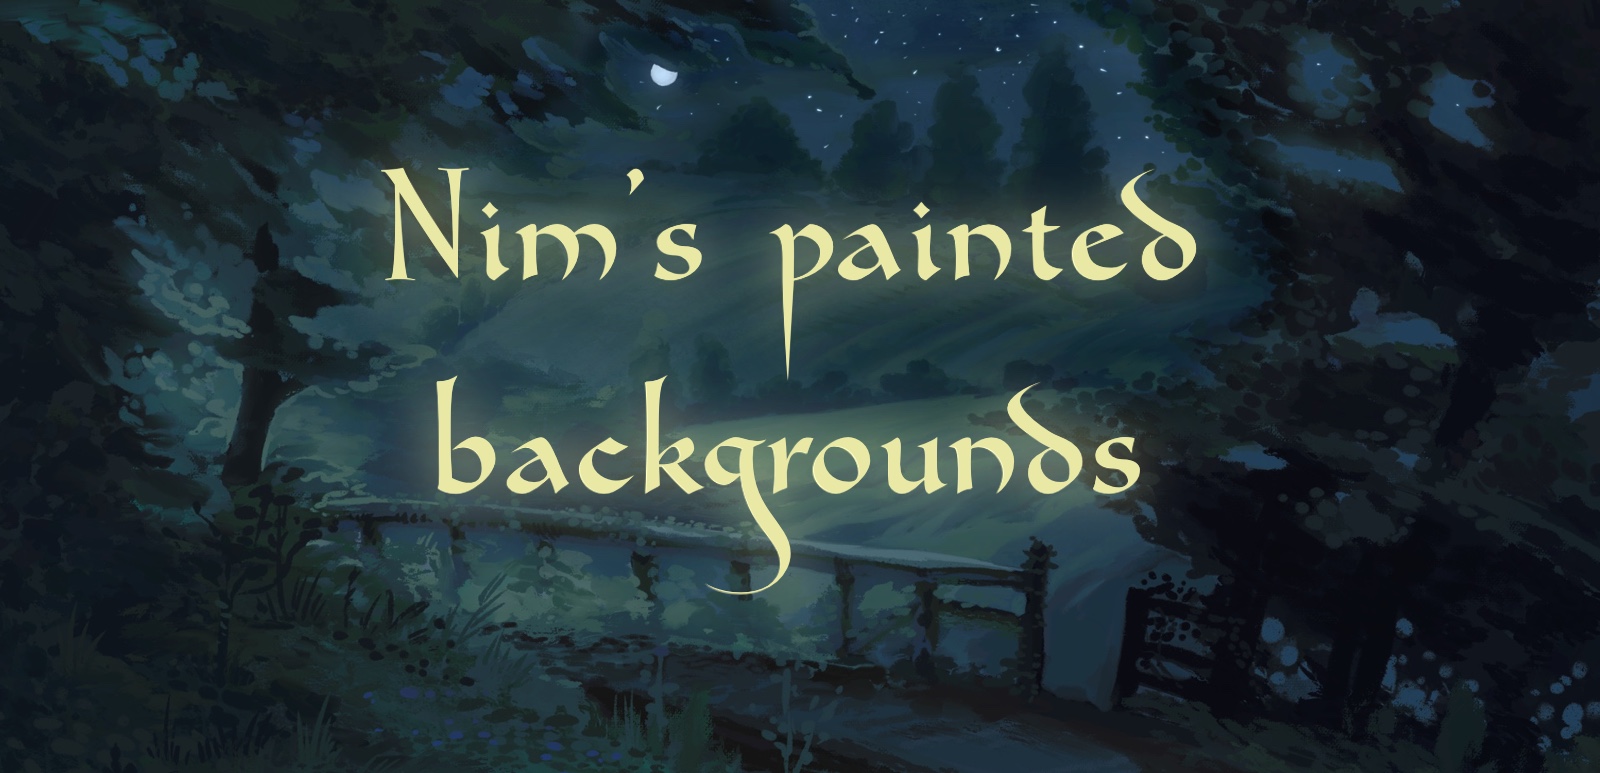 Painted forest backgrounds for VNs